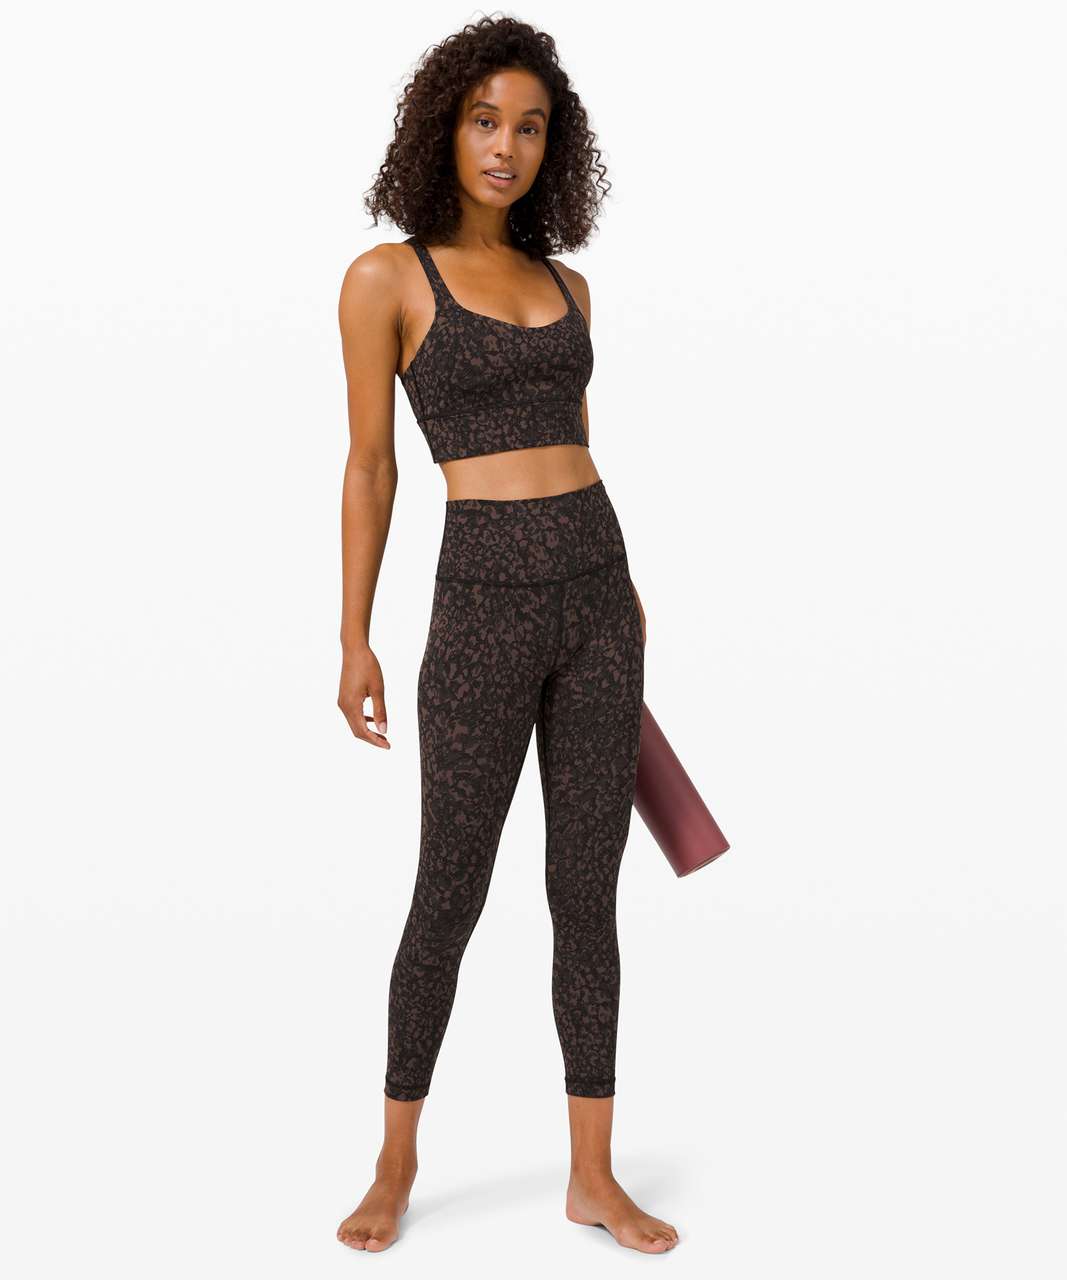 Lululemon Wunder Under High-Rise Tight 25" *Full-On Luxtreme - Wild Thing Camo Brown Earth Multi